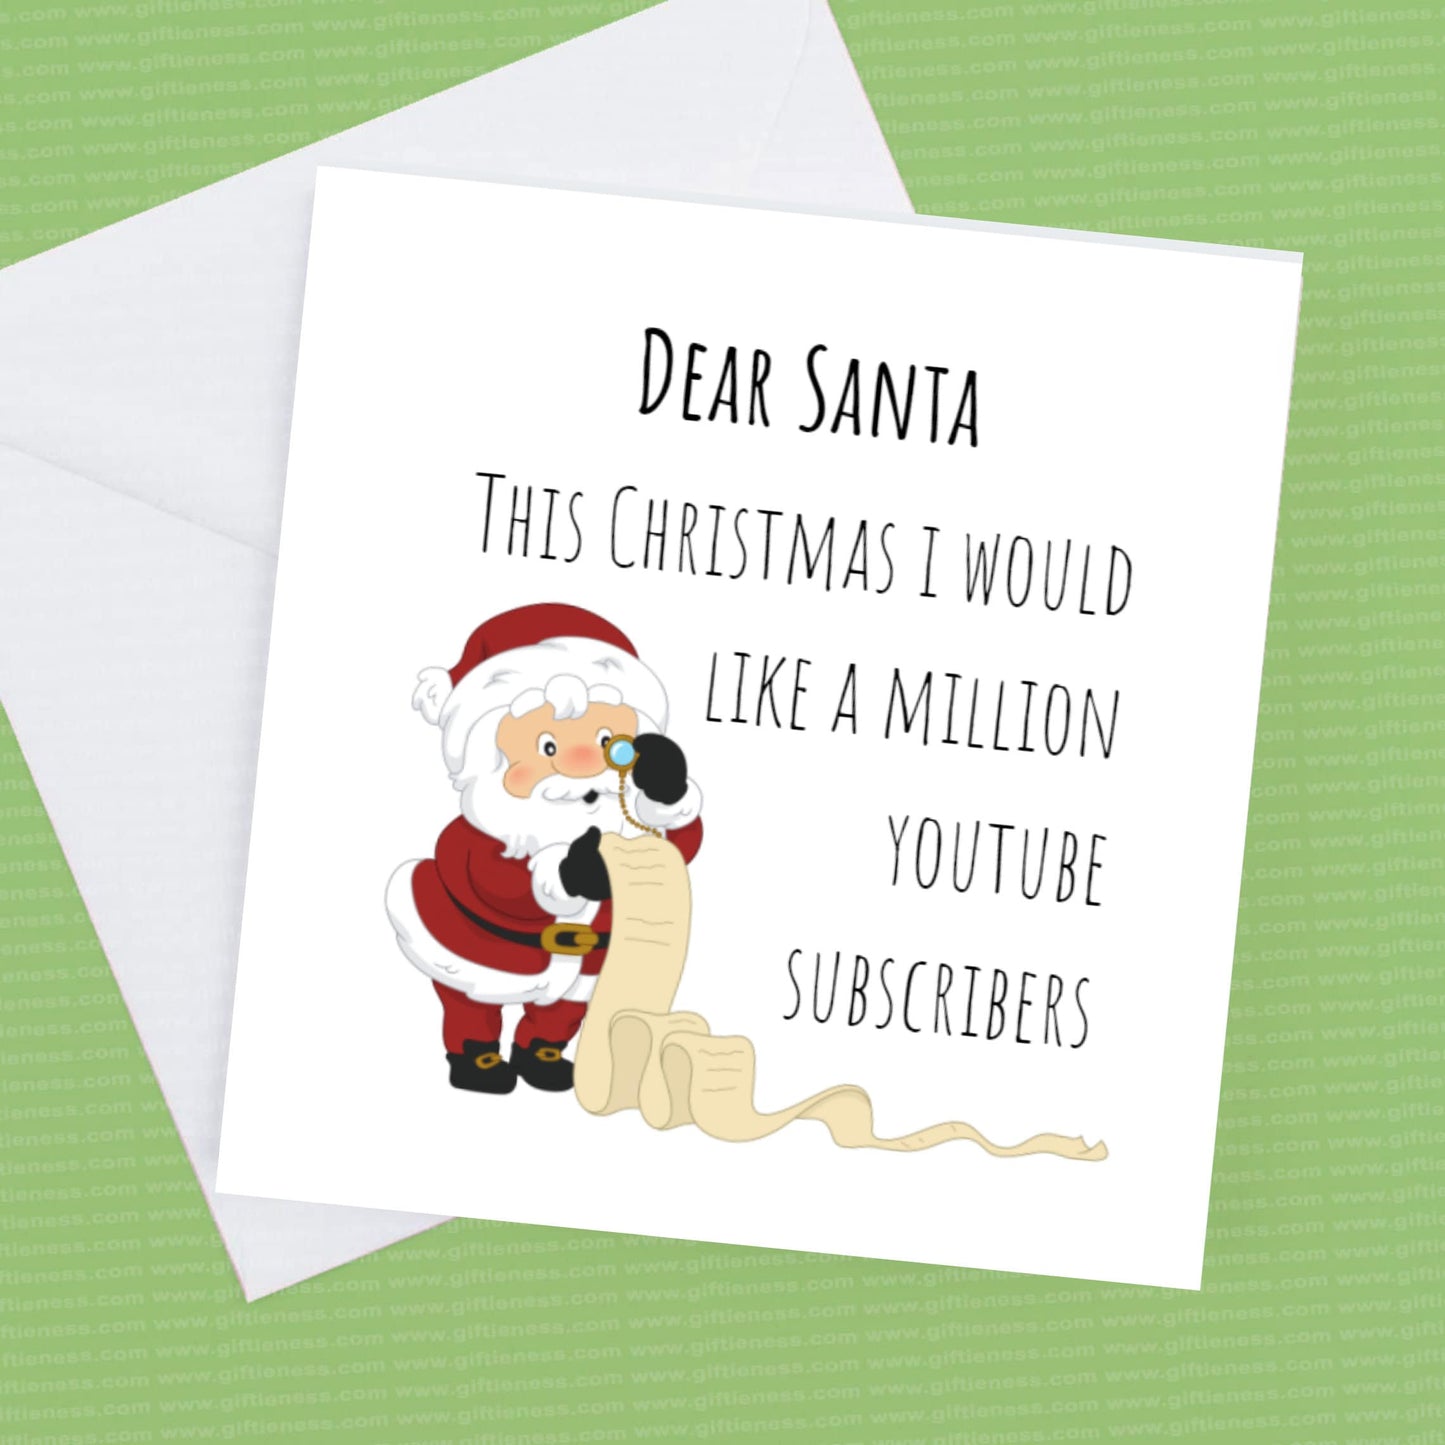 Dear Santa This Year I would Like a million Youtube subscribers